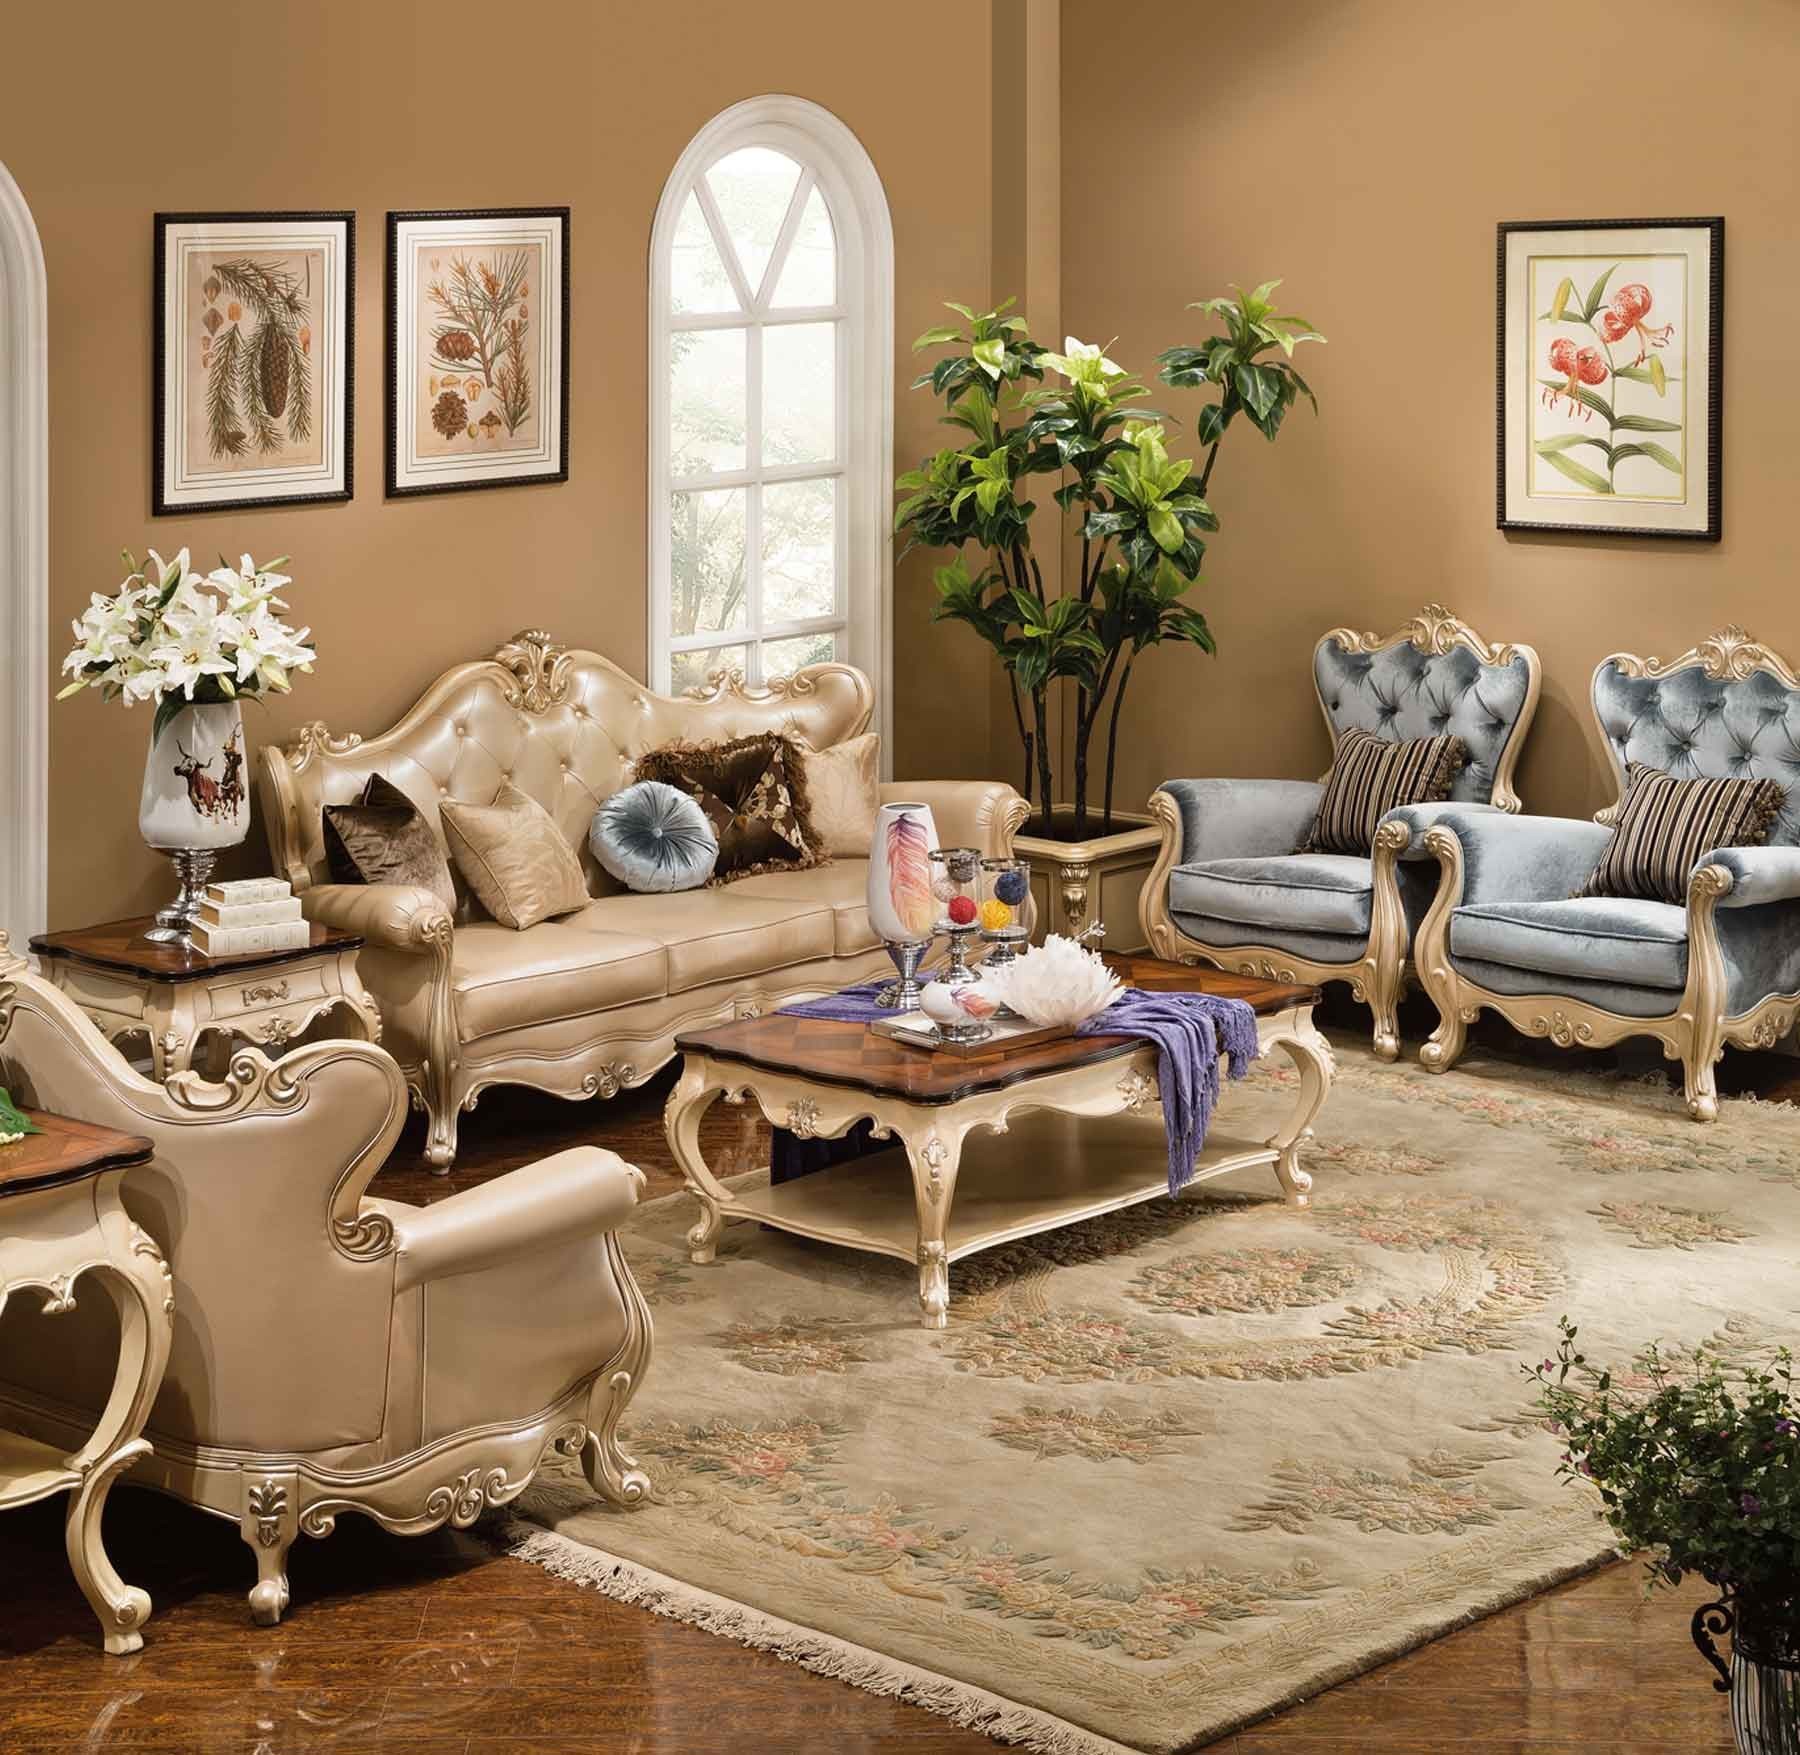 St. Ives 5-pc Living Room Set shown in Egyptian Pearl finish